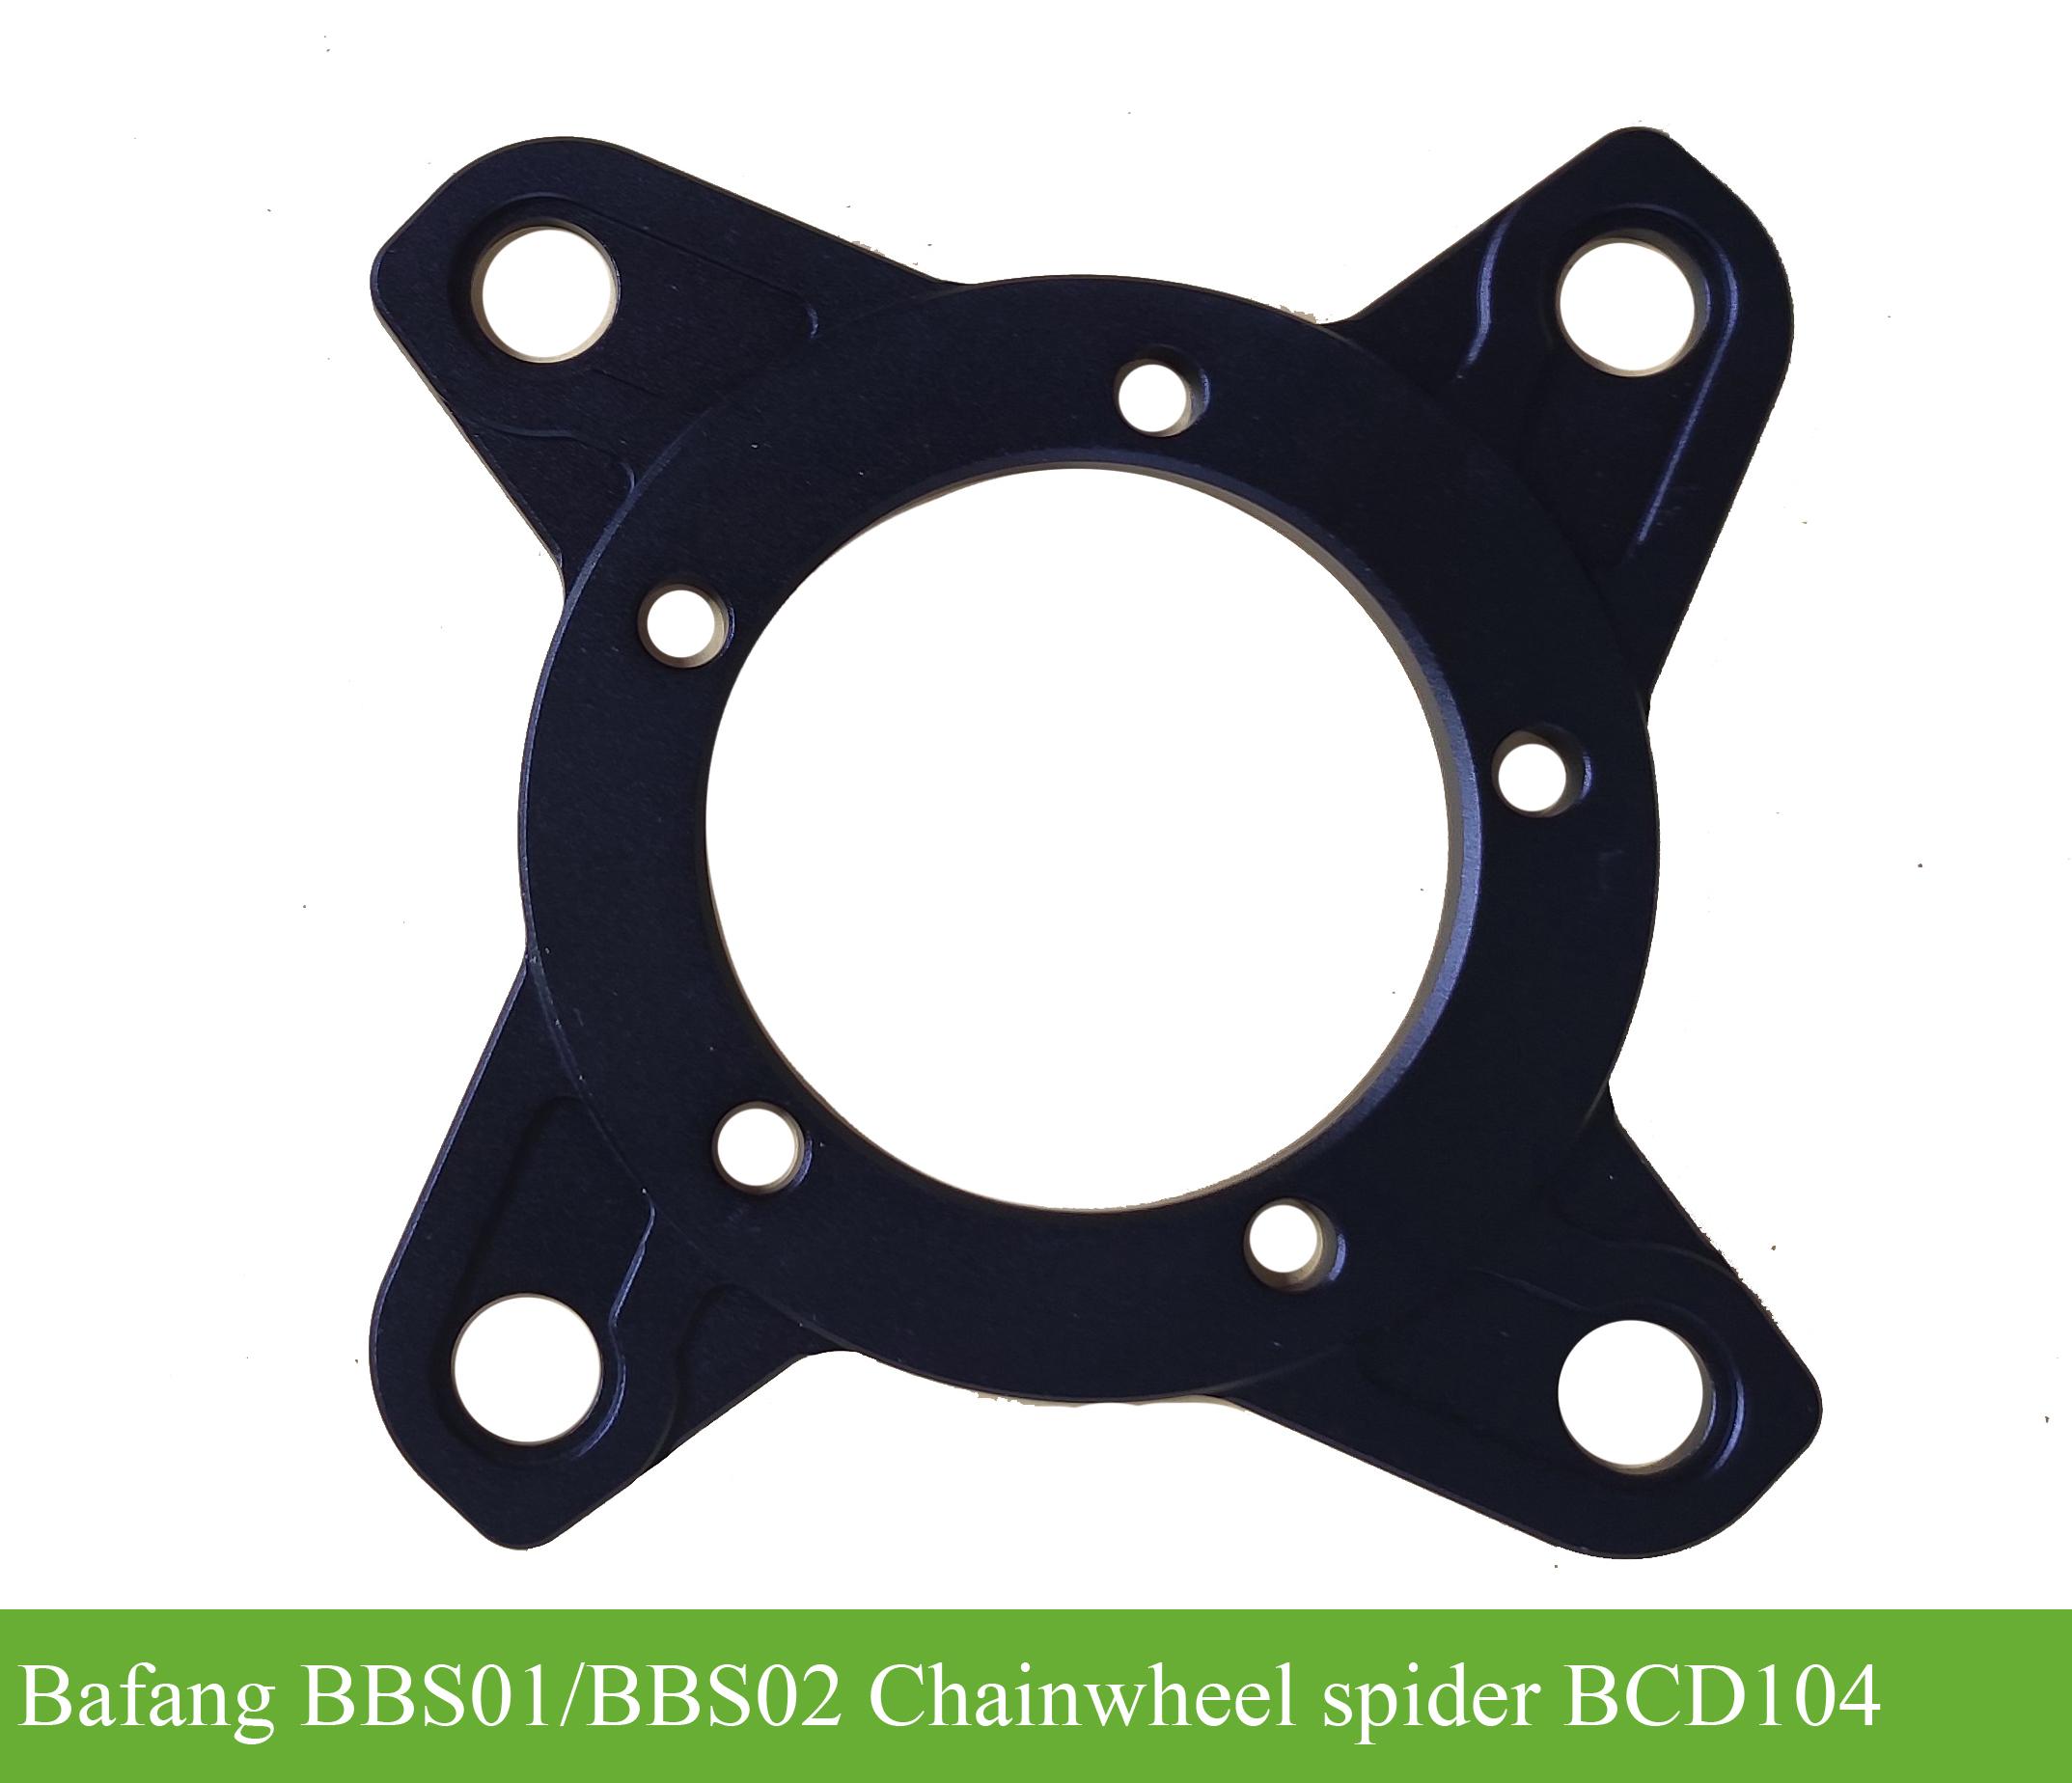 Customized Bbs 104 Bcd Chain Wheel Spider Adapter For 8fun Bafang Mid Drive Bbs0 